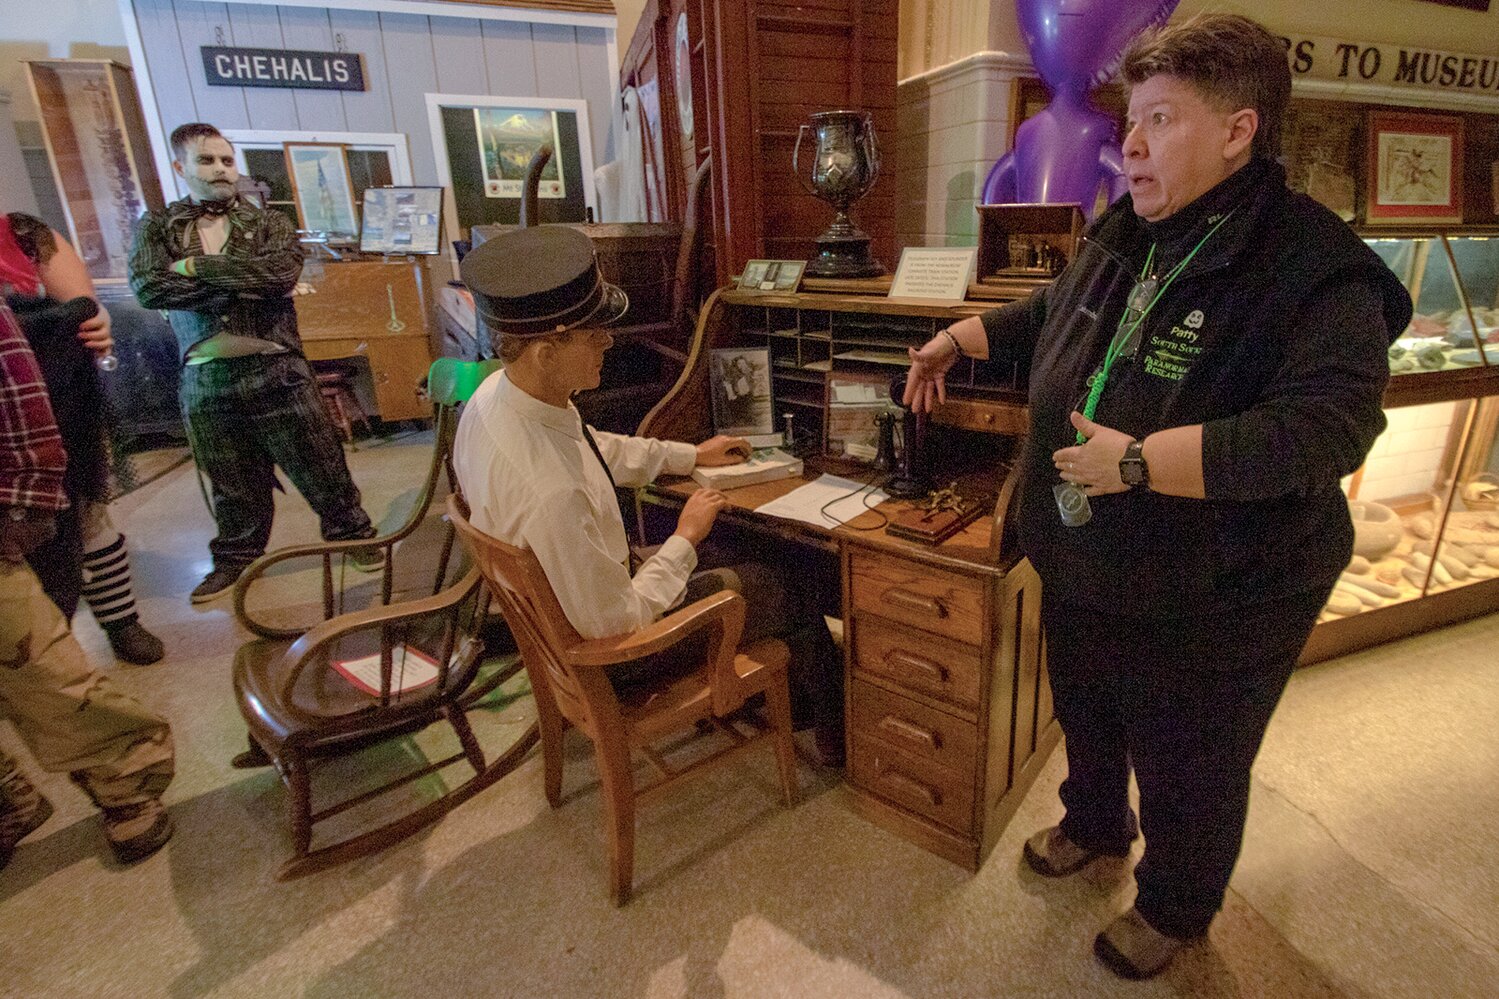 Patty Valdez of South Sound Paranormal Research explains to ghost tour attendees what she believes ghosts actually are at the Lewis County Historical Museum on Saturday, Oct. 28.